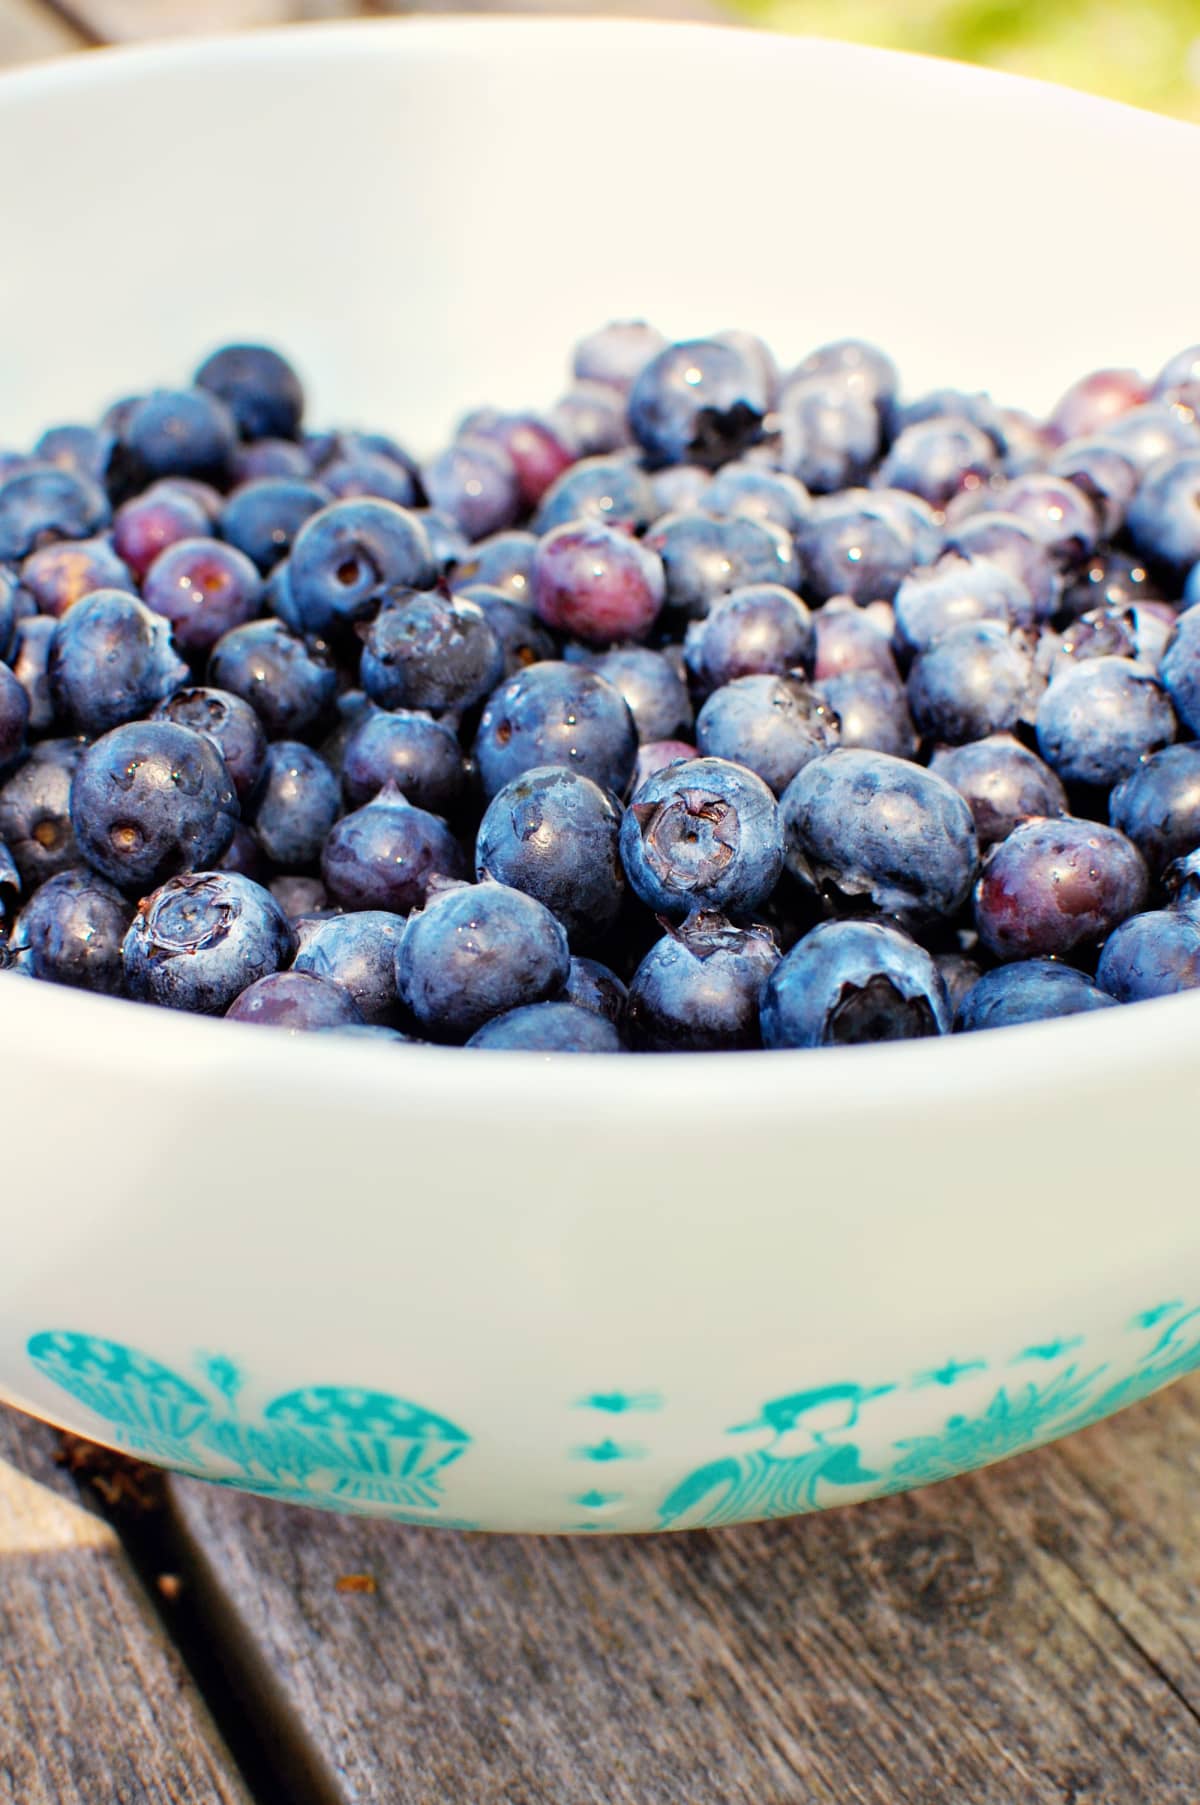 Blueberries in Pyrex bowl with vintage design.